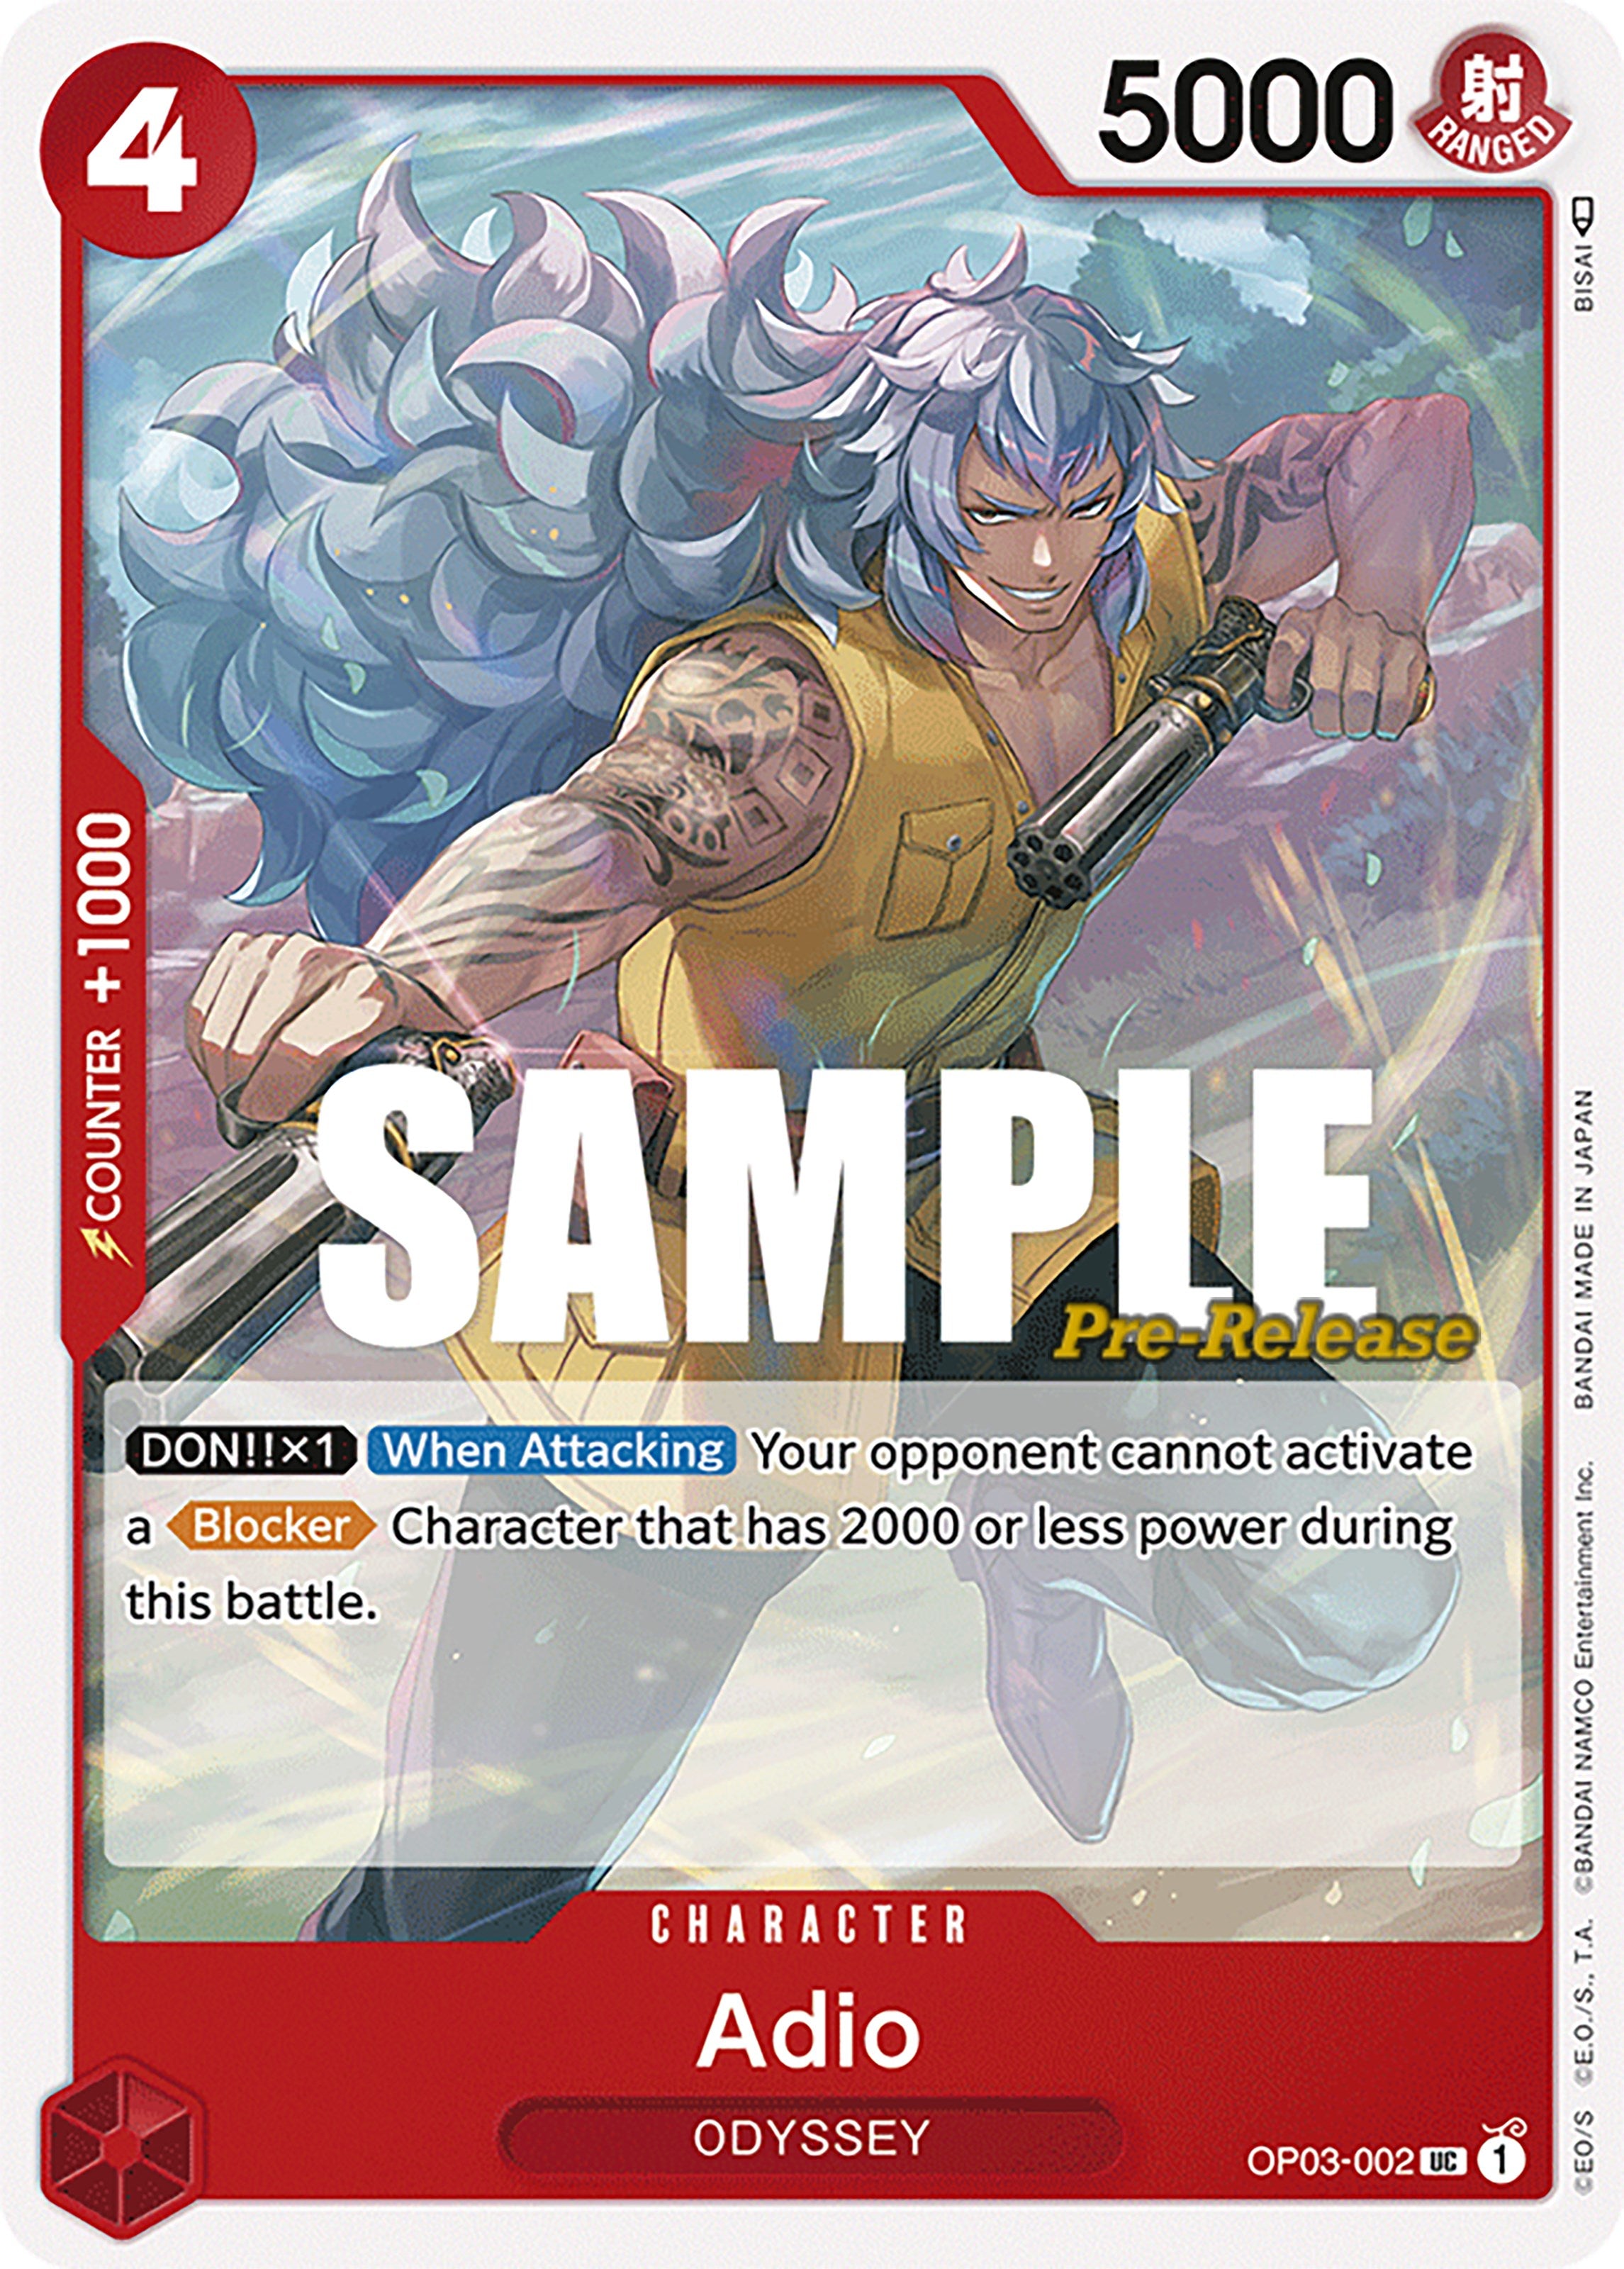 Adio [Pillars of Strength Pre-Release Cards] | Cards and Coasters CA